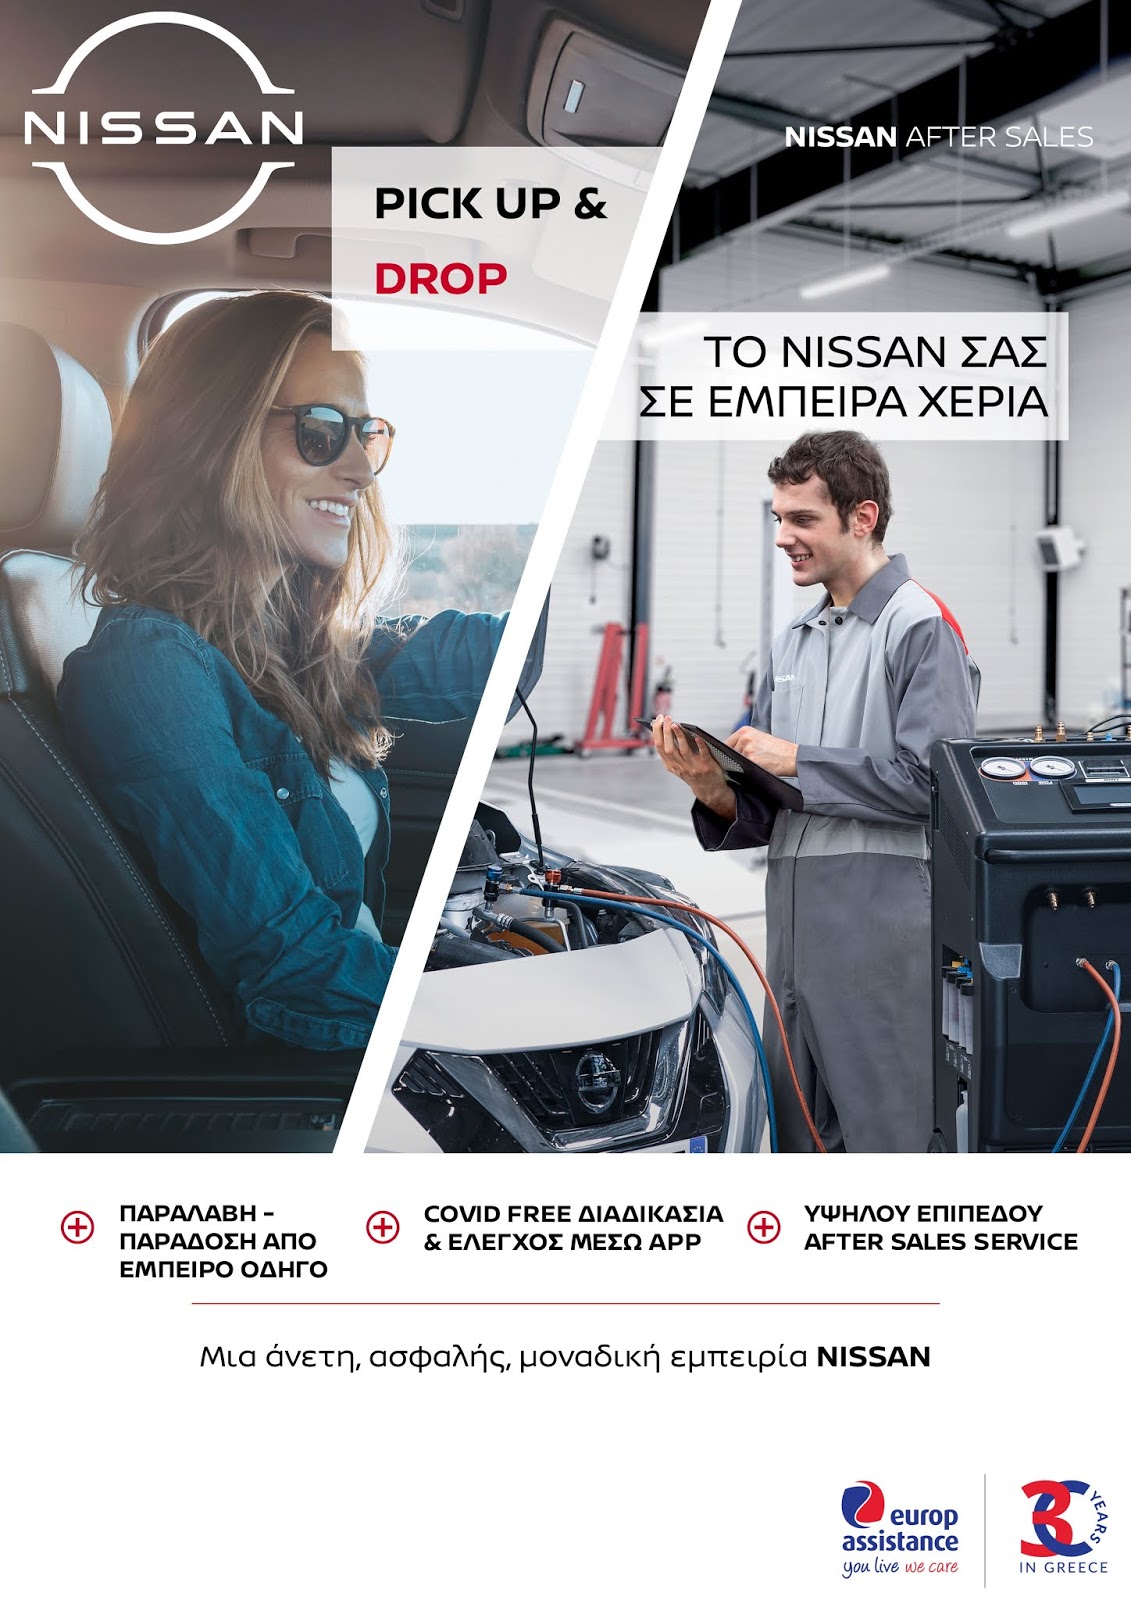 pick up drop2Beurop2Bassistance2Bfinal 1 Pick Up & Drop, for the service of your Nissan